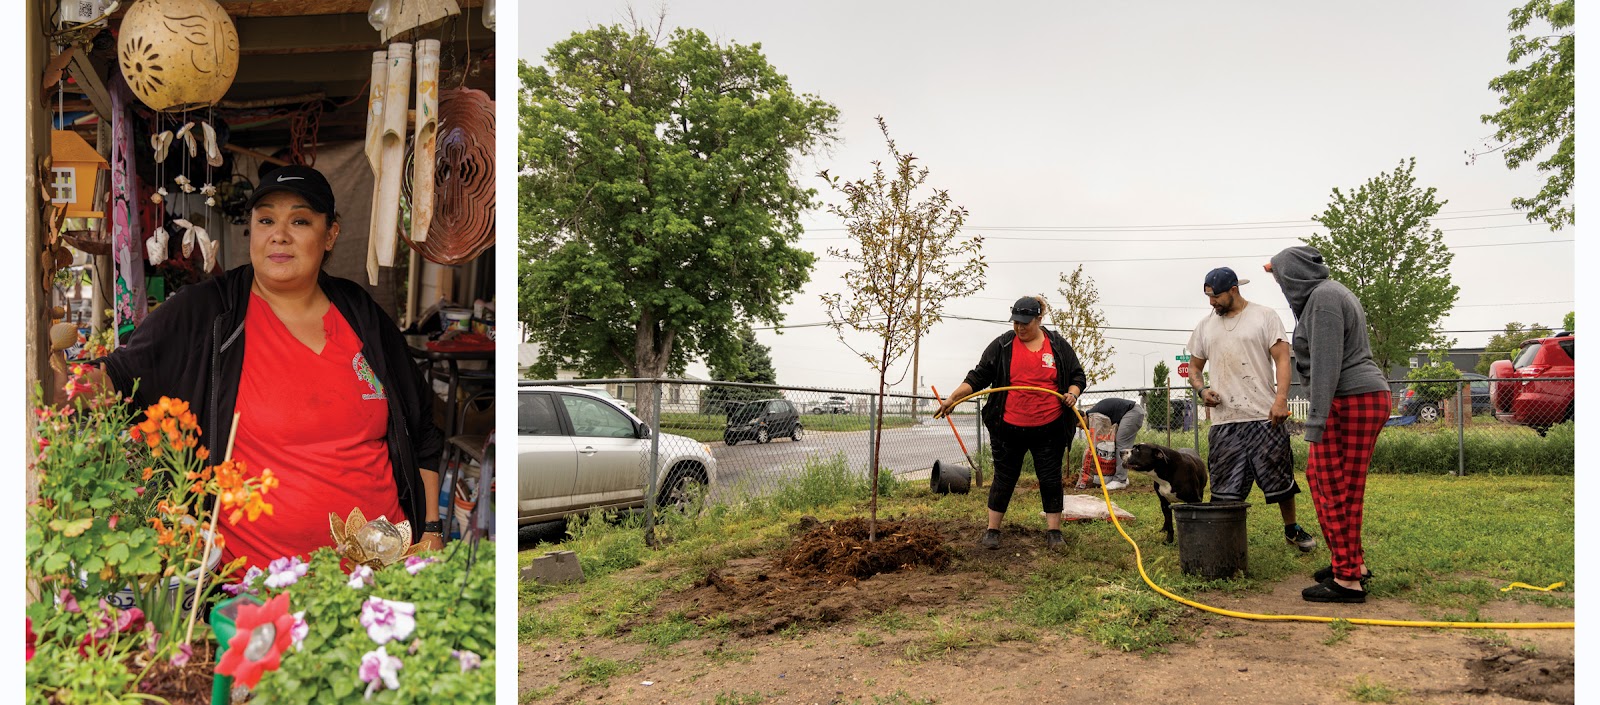 Yadira Sanchez takes a break in her front yard while helping neighbors select a tree (left). Sanchez waters a sapling during a community tree-planting event in June (right).

Amanda Lopez/High Country News